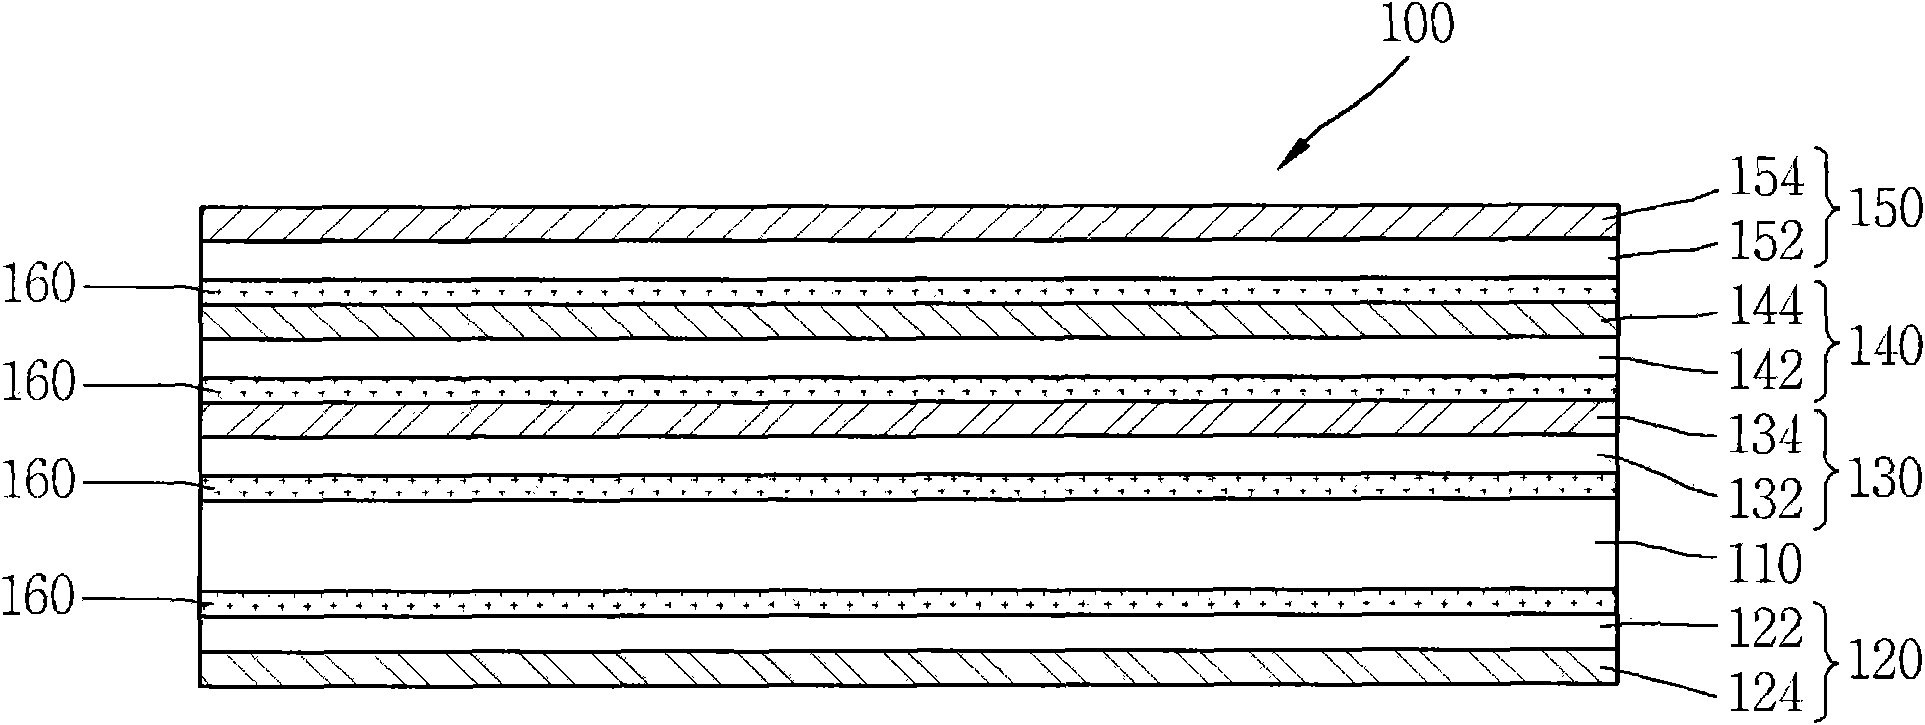 Filter and display device having the same